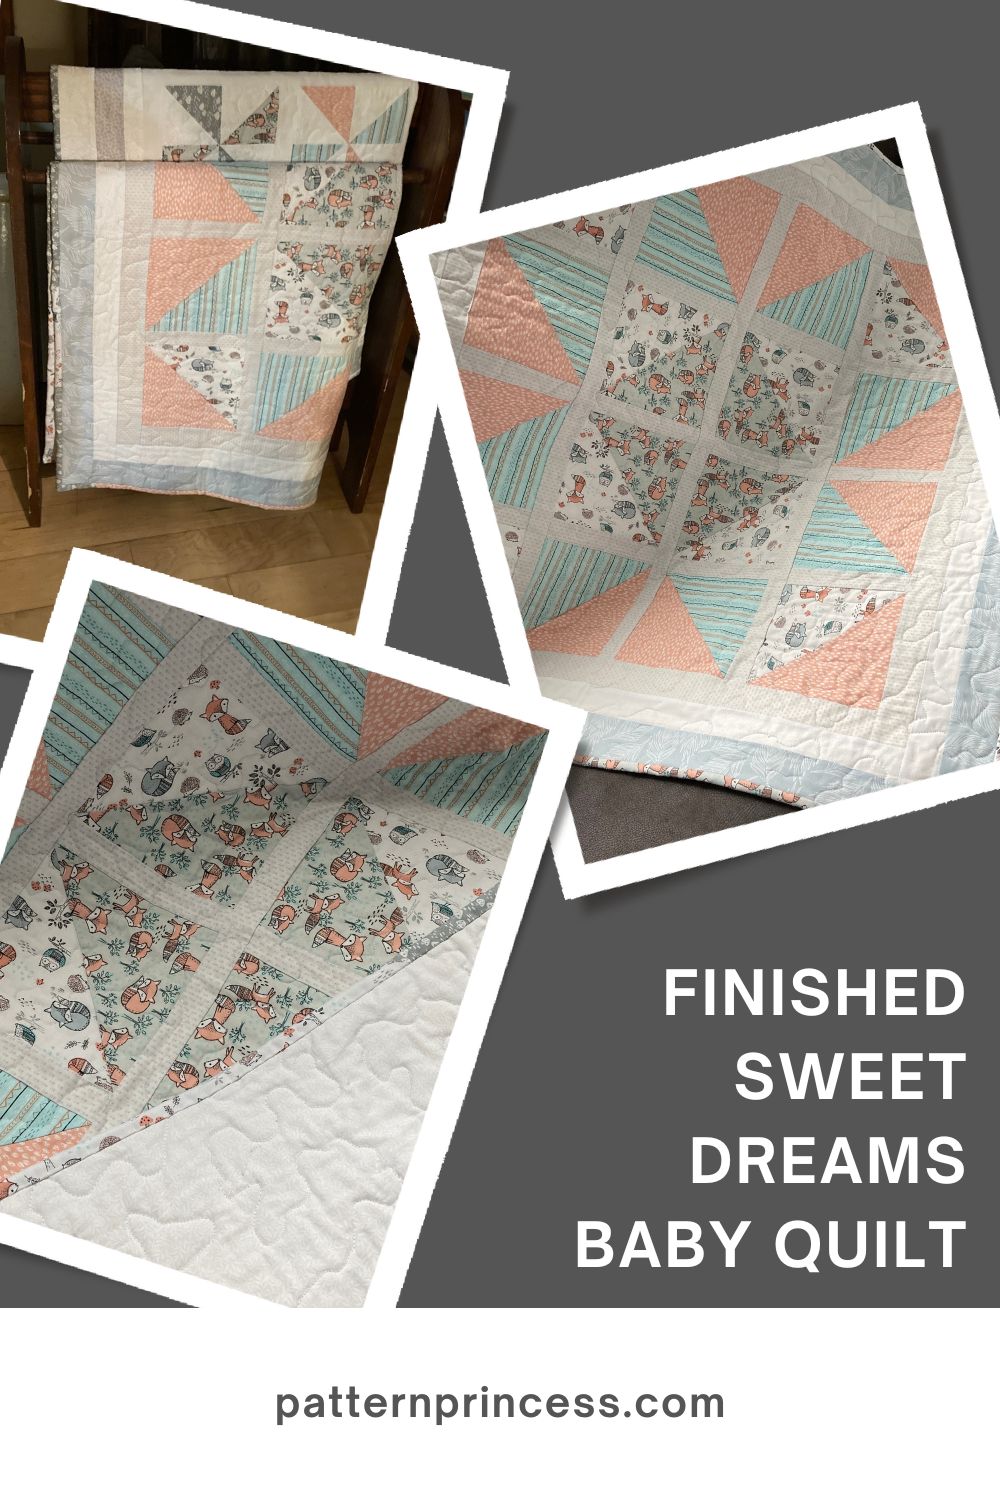 Finished Sweet Dreams Baby Quilt